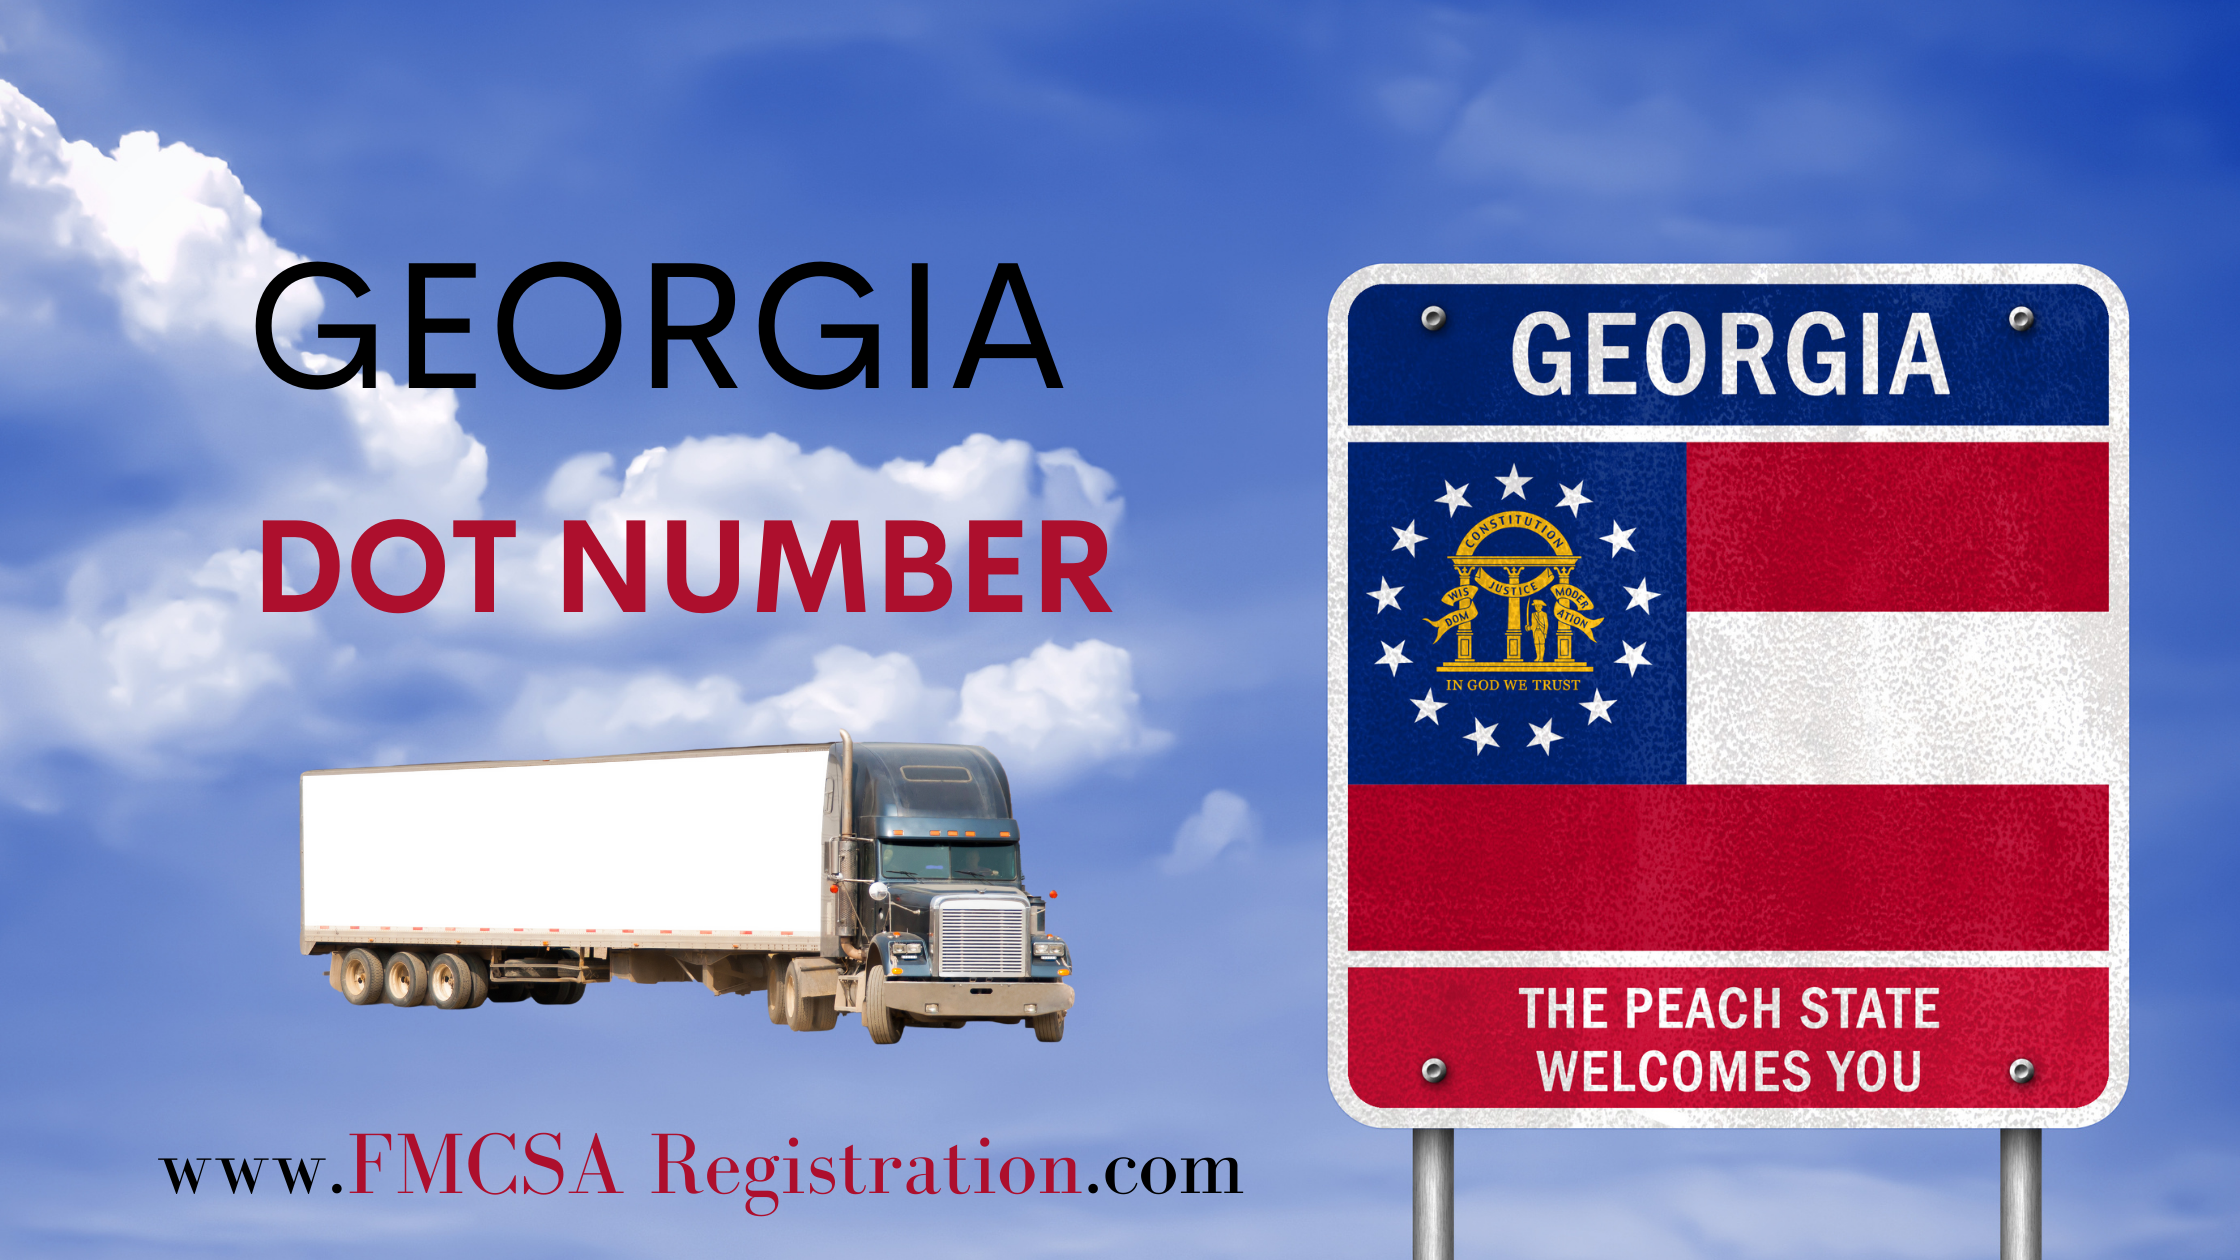 Georgia DOT Number product image reference 1